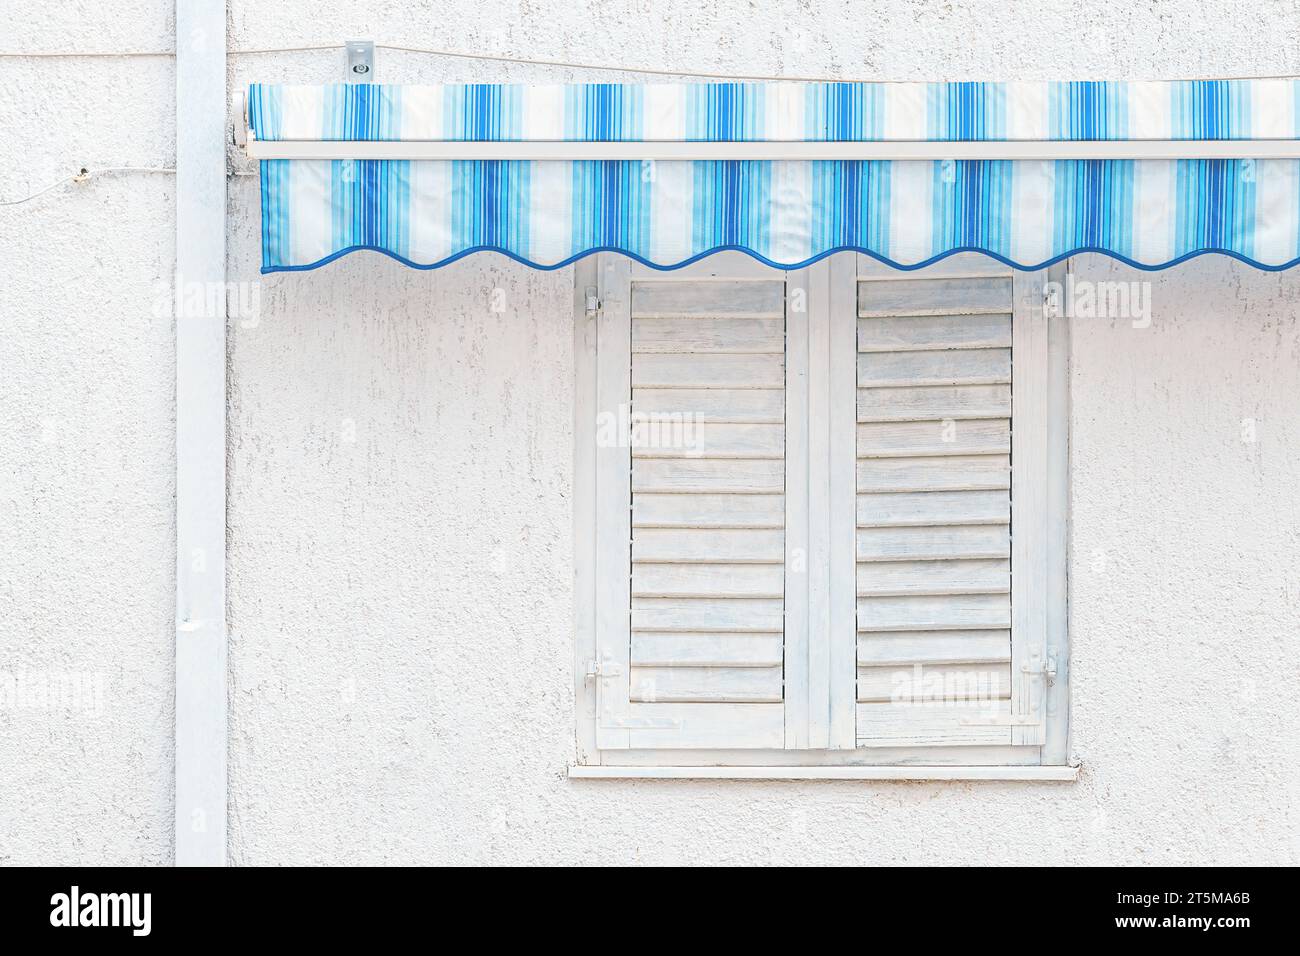 Closed white window shutters with blue awnings, detail from croatian seaside, copy space included Stock Photo